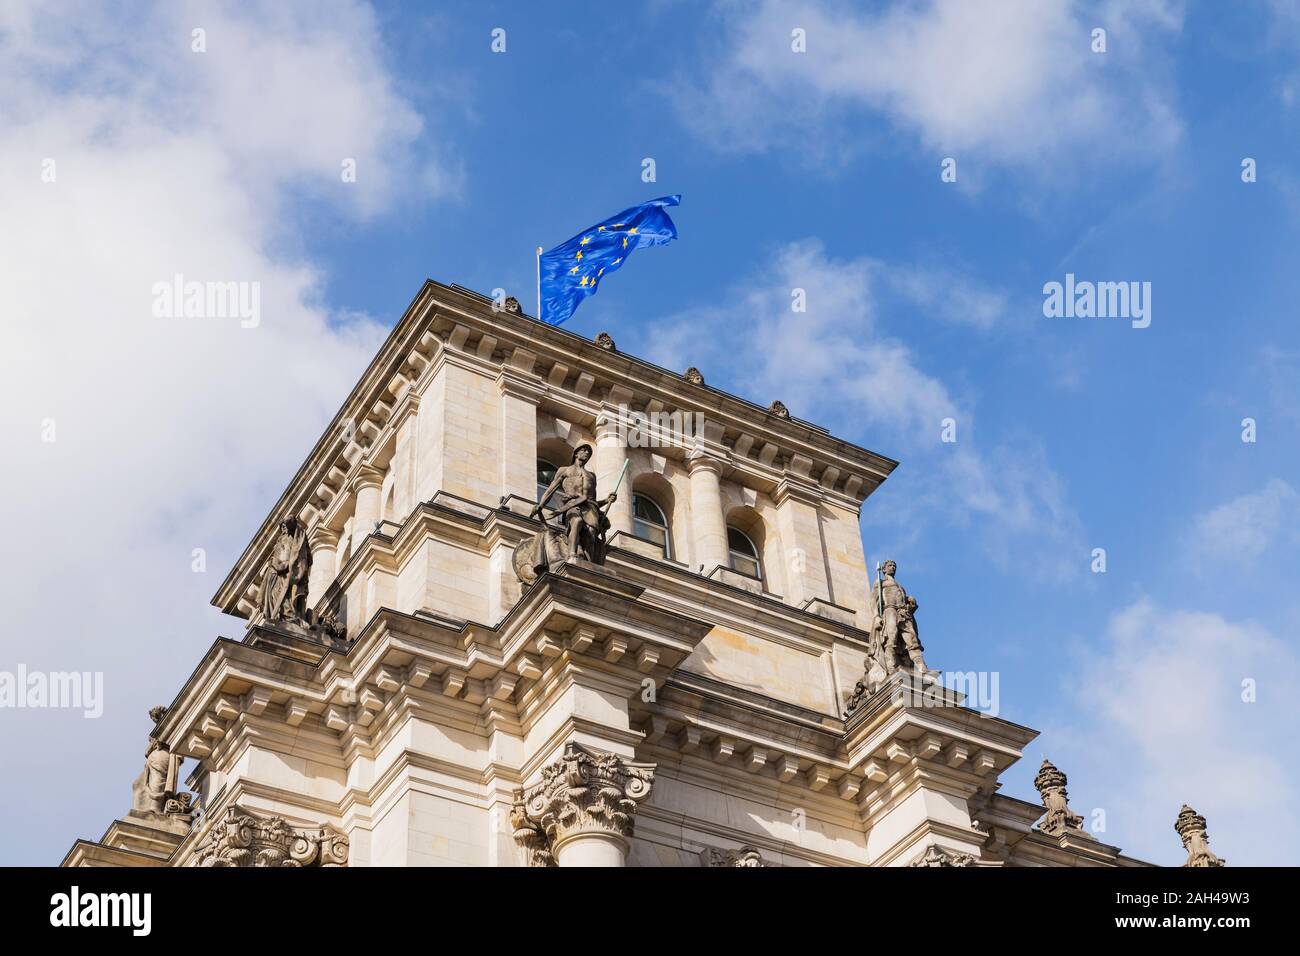 Germany, Berlin, European Union flag on top of Reichstag building Stock Photo